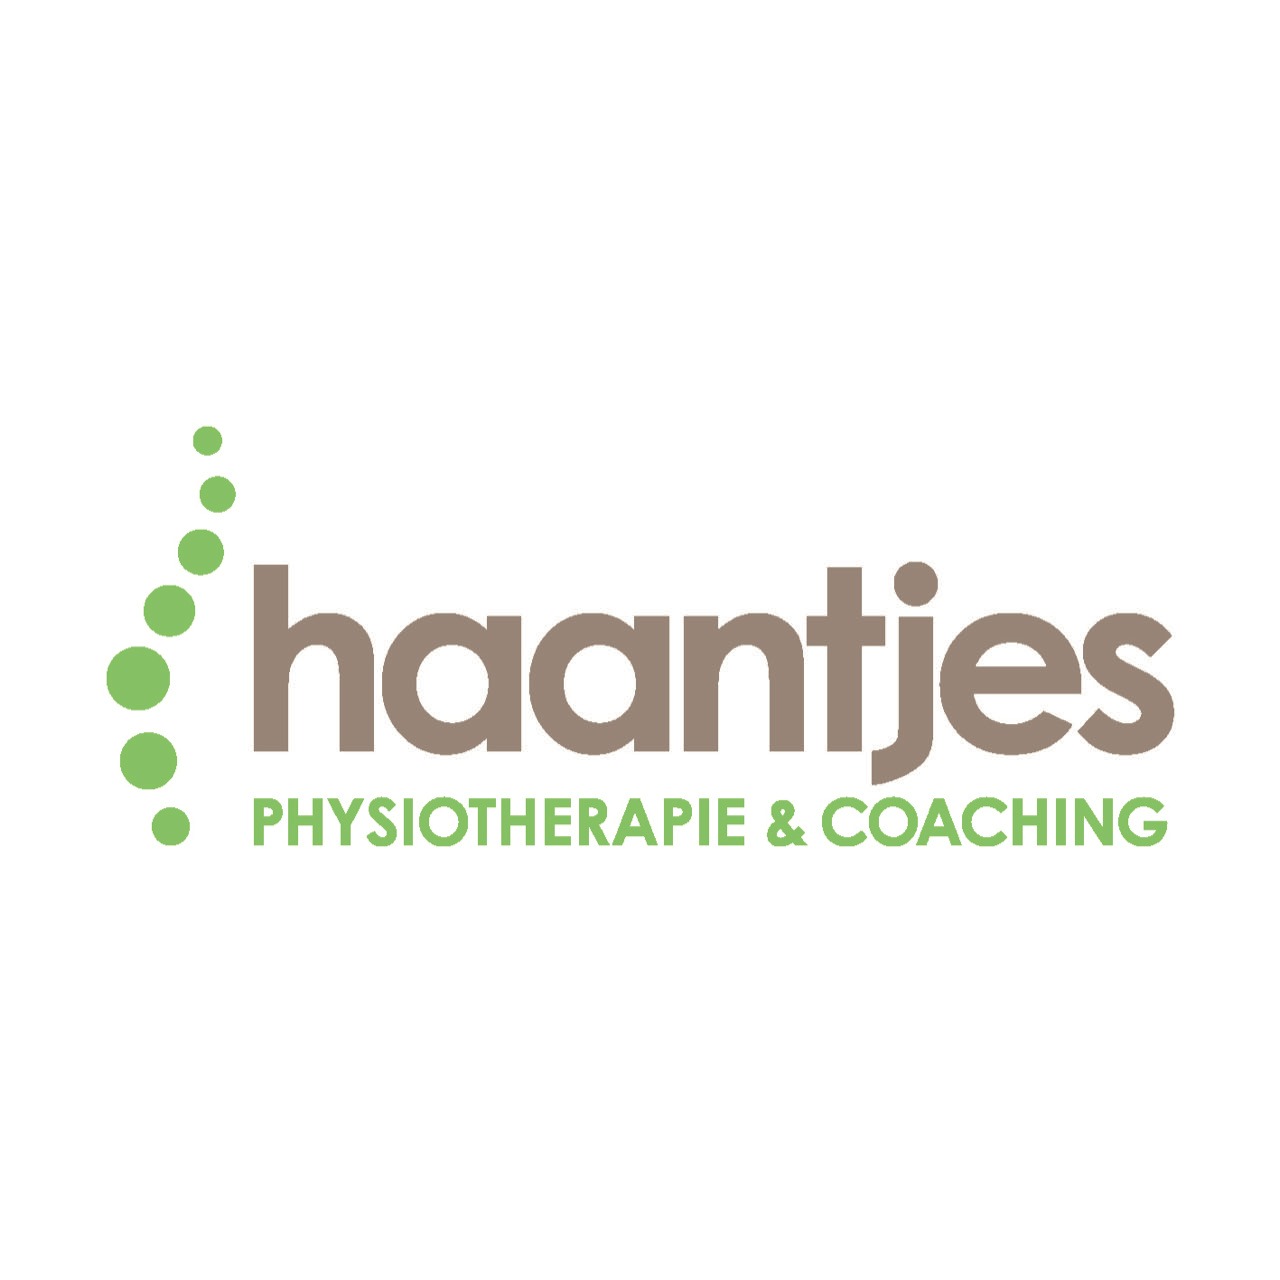 Haantjes Physiotherapie & Coaching  